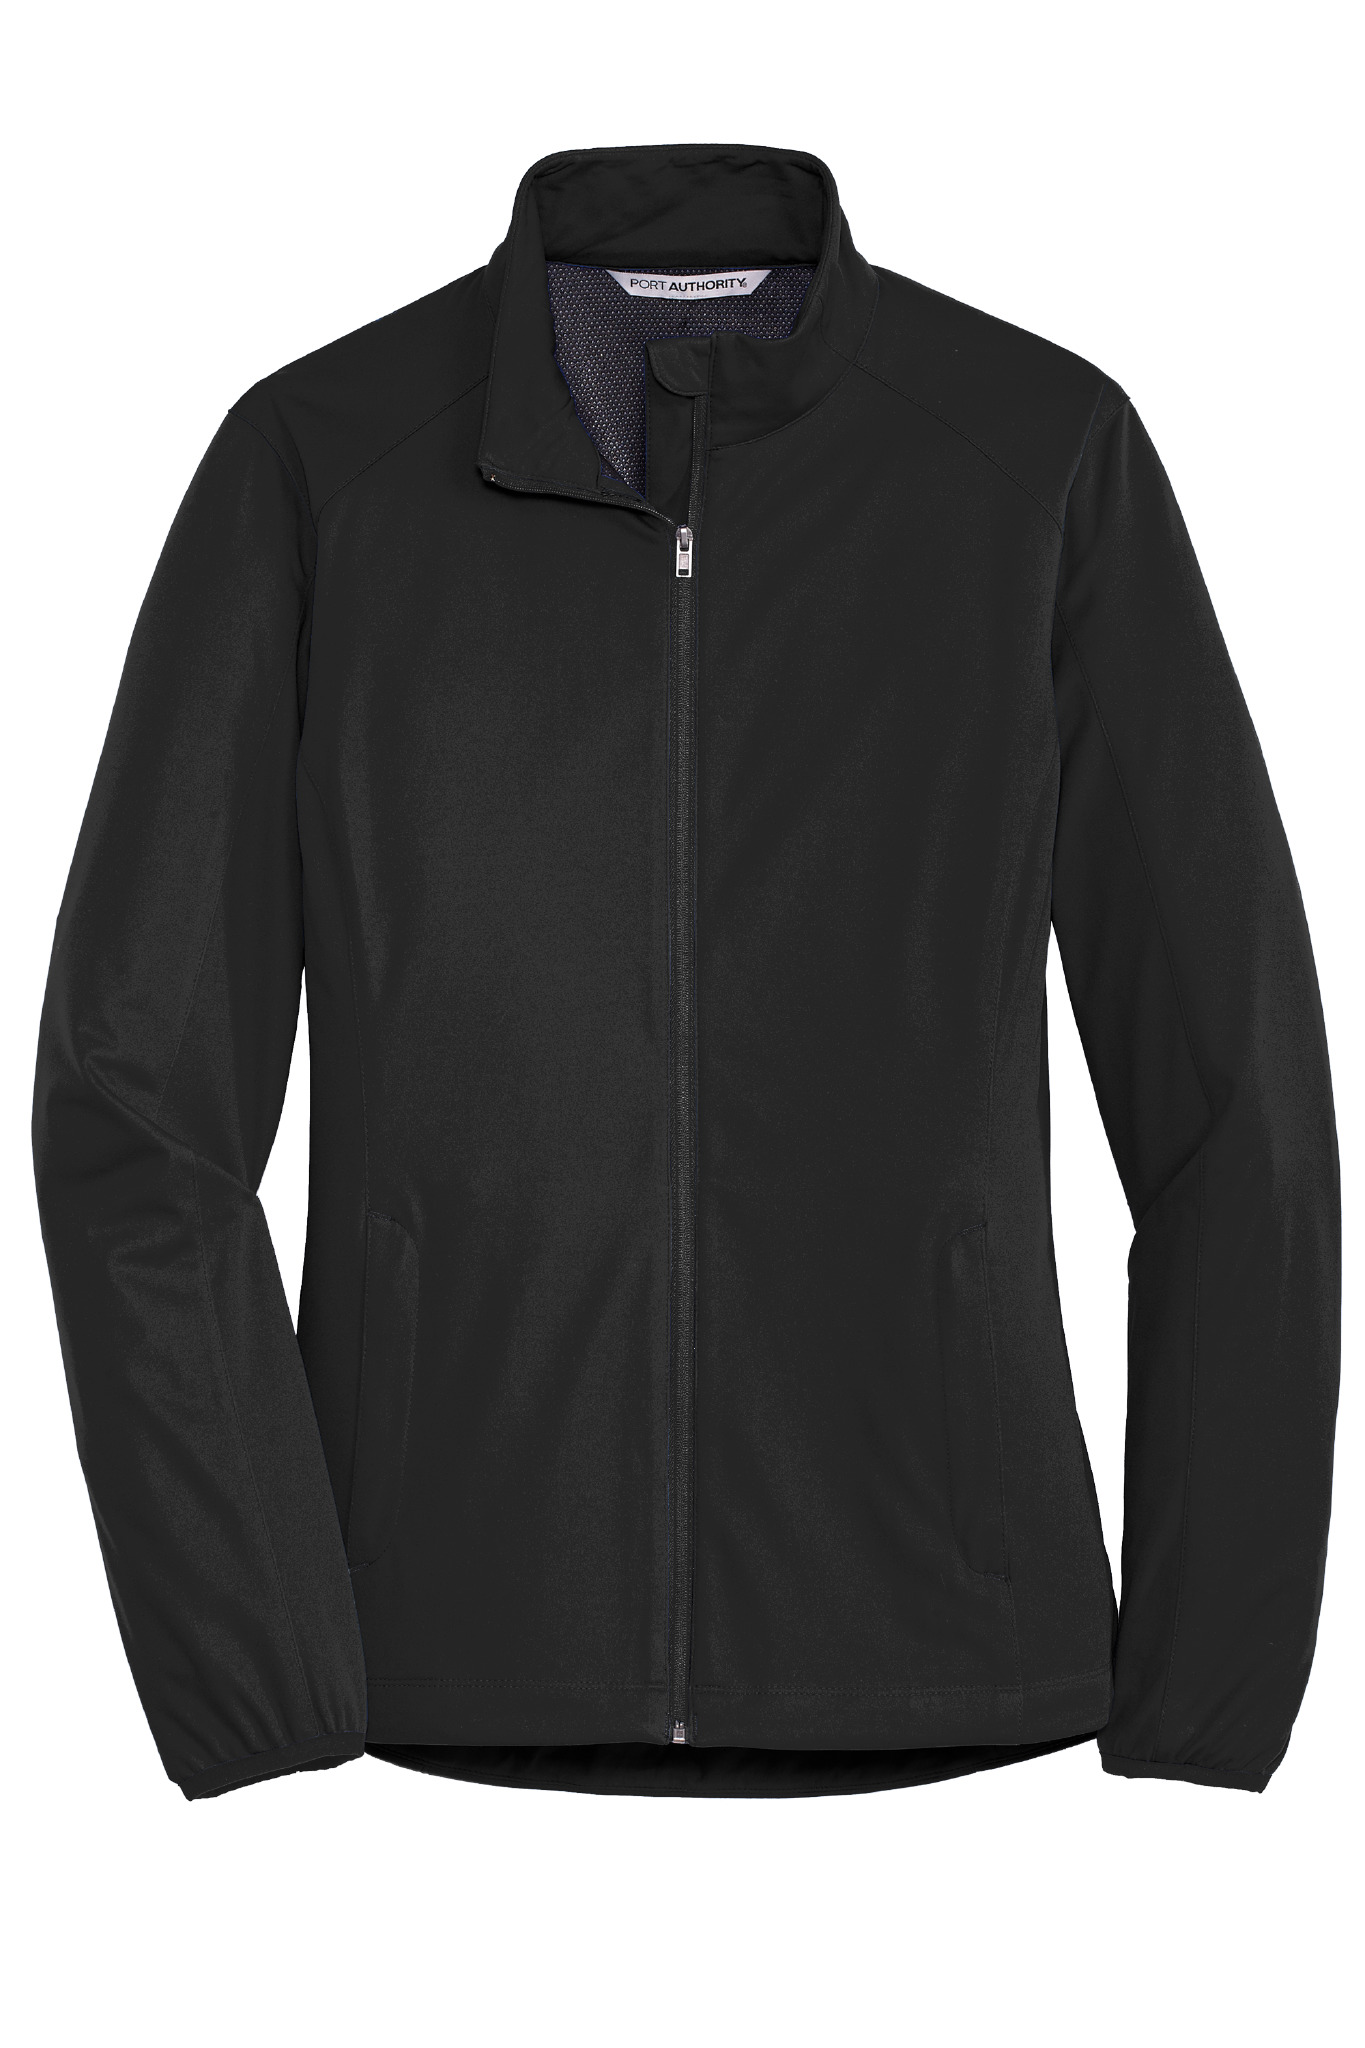 LADIES ACTIVE SOFT SHELL JACKET